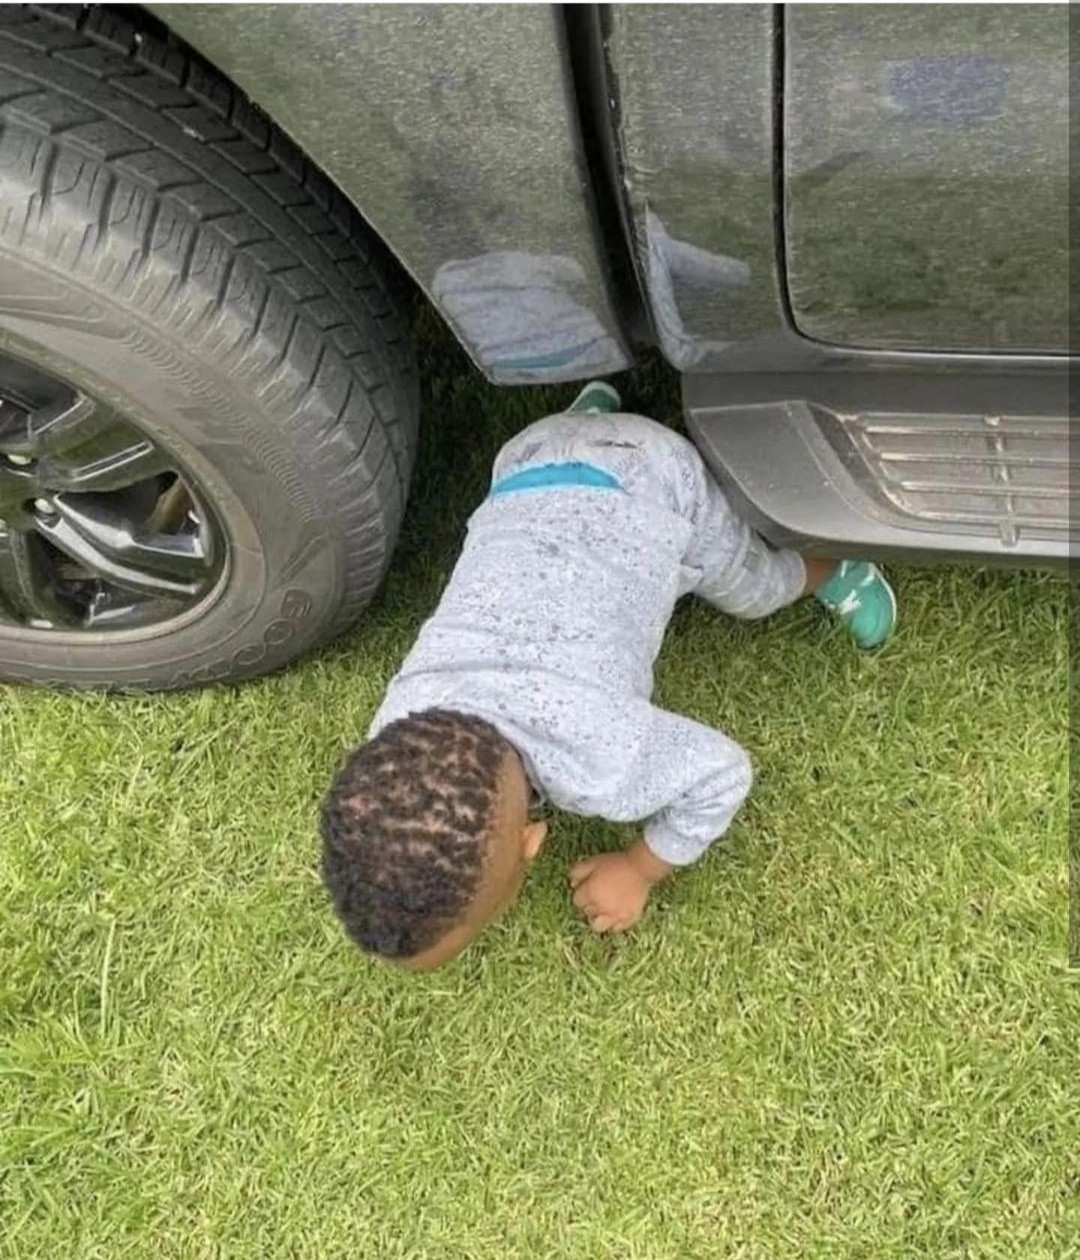 Tragedy averted as father almost crushes his son who was hiding under his car